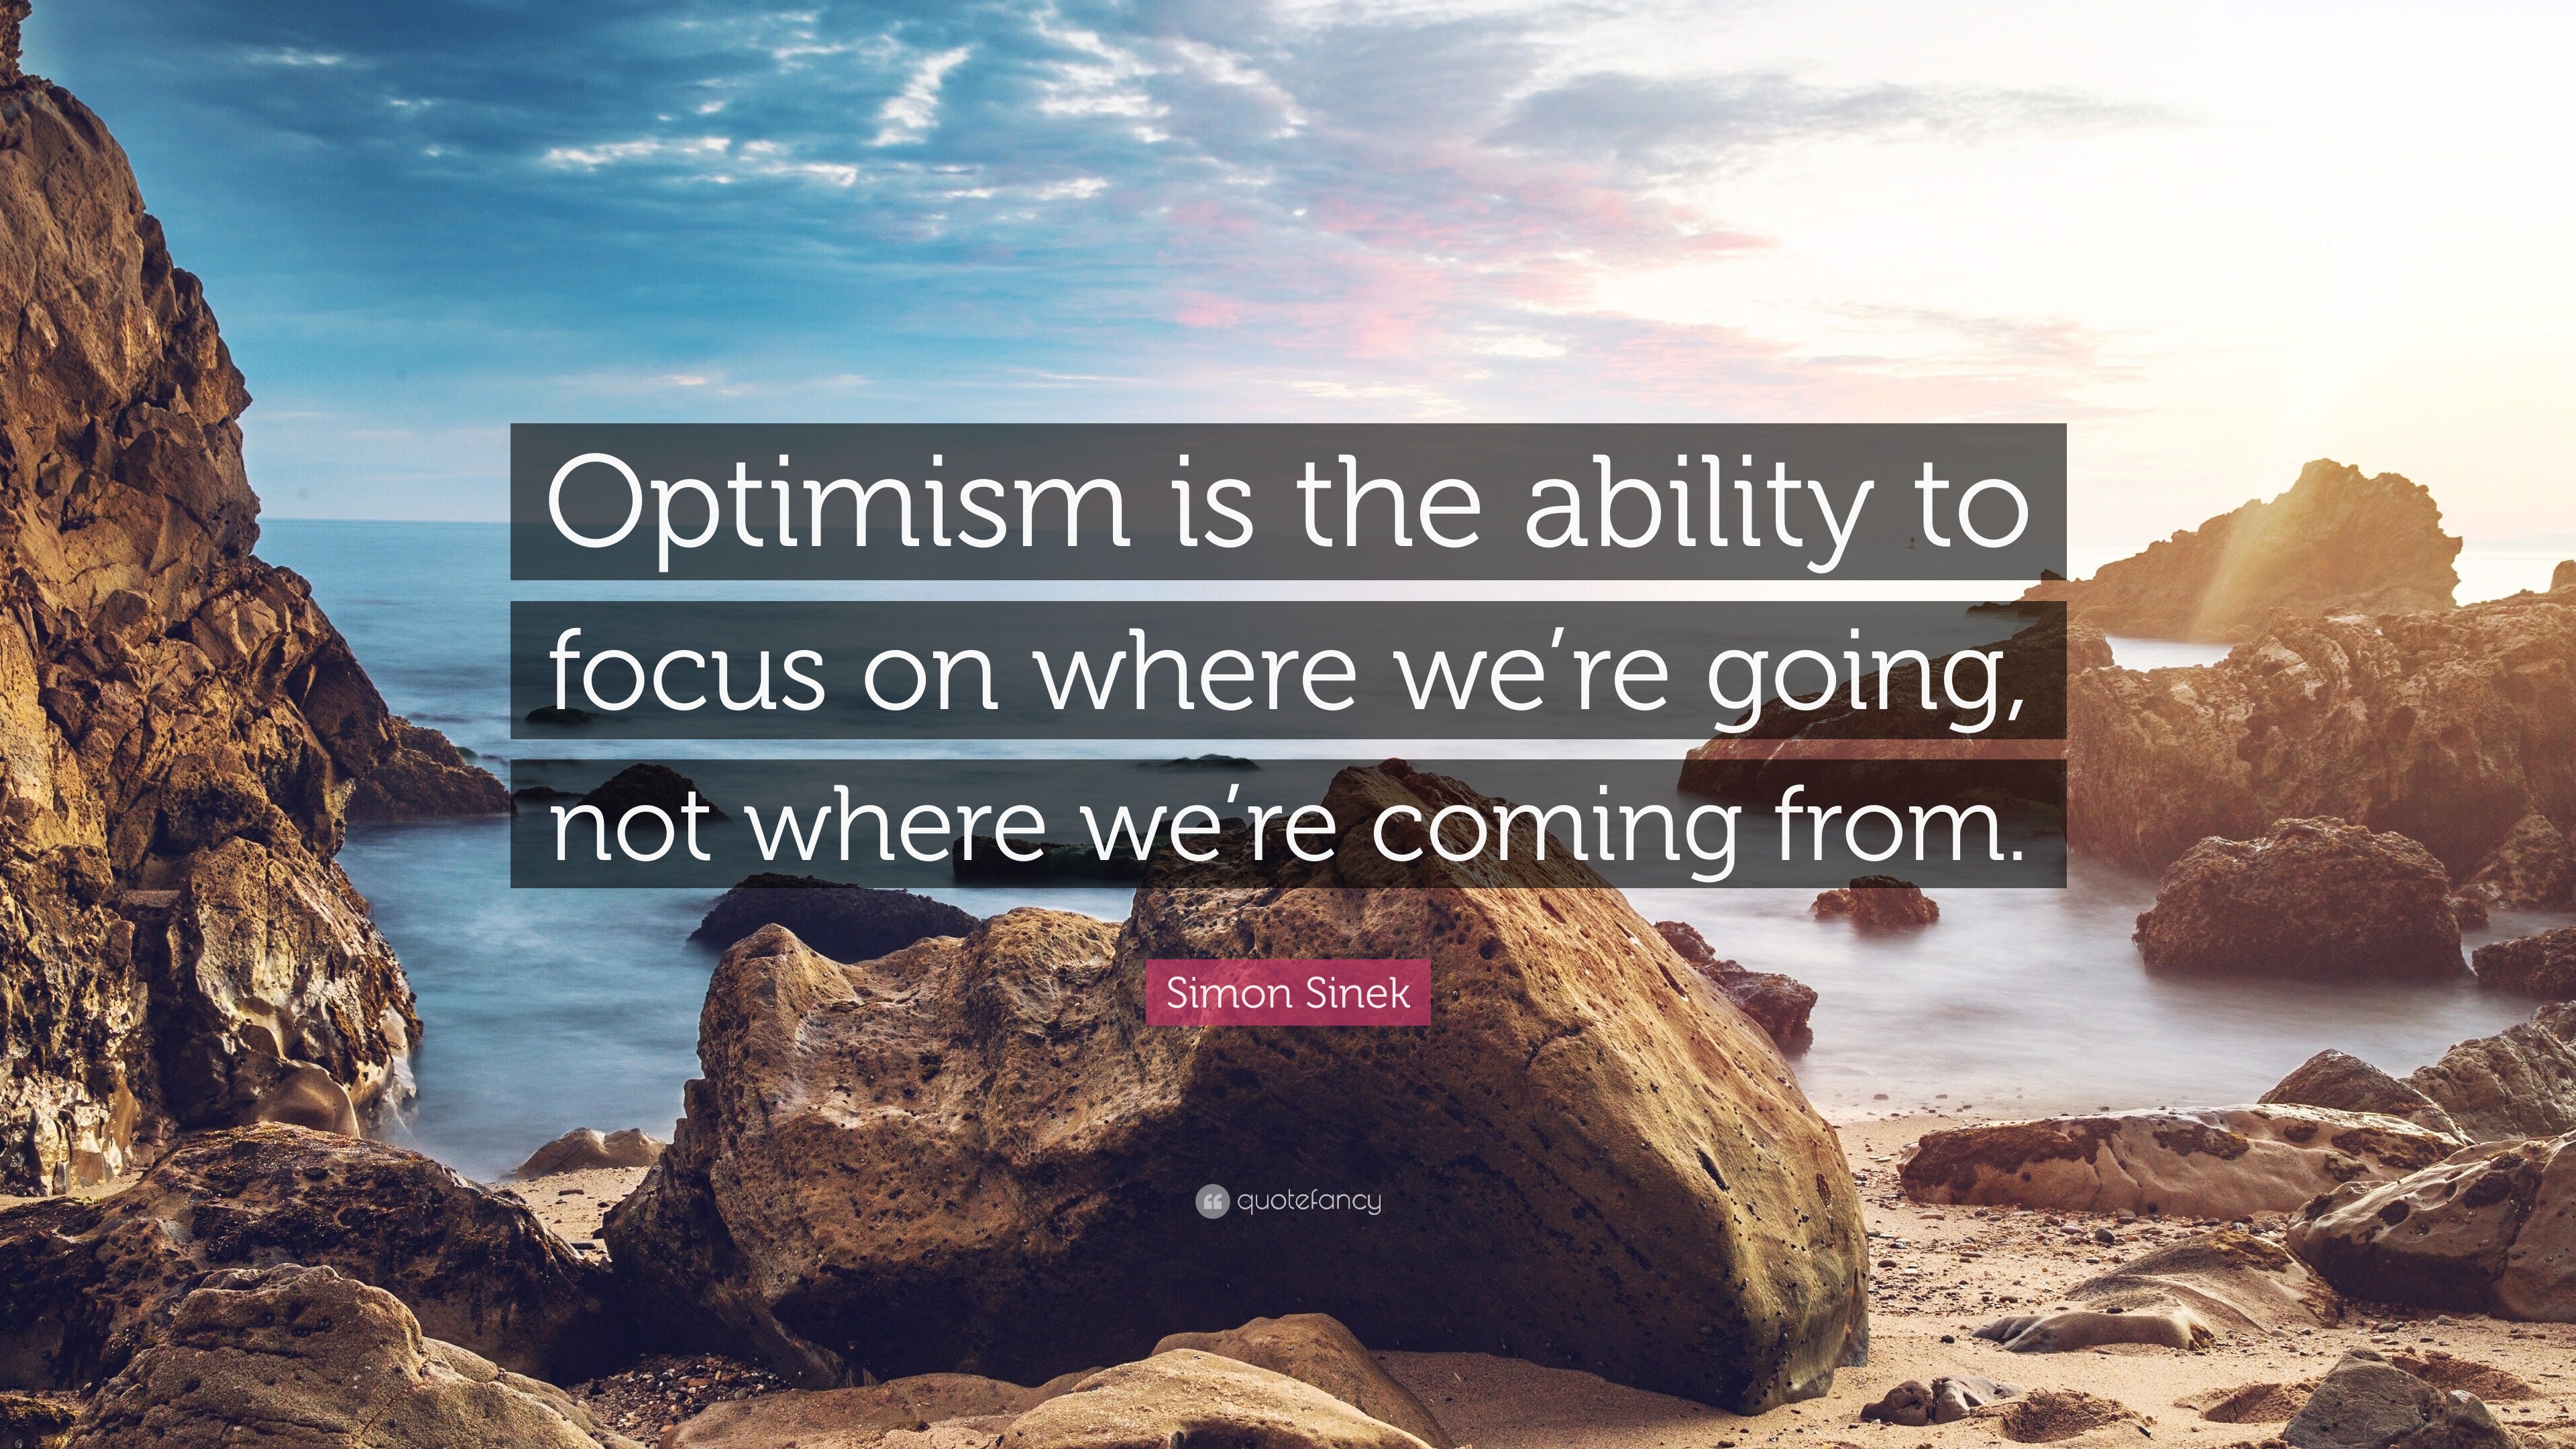 Simon Sinek Quote: “Optimism is the ability to focus on where we’re ...